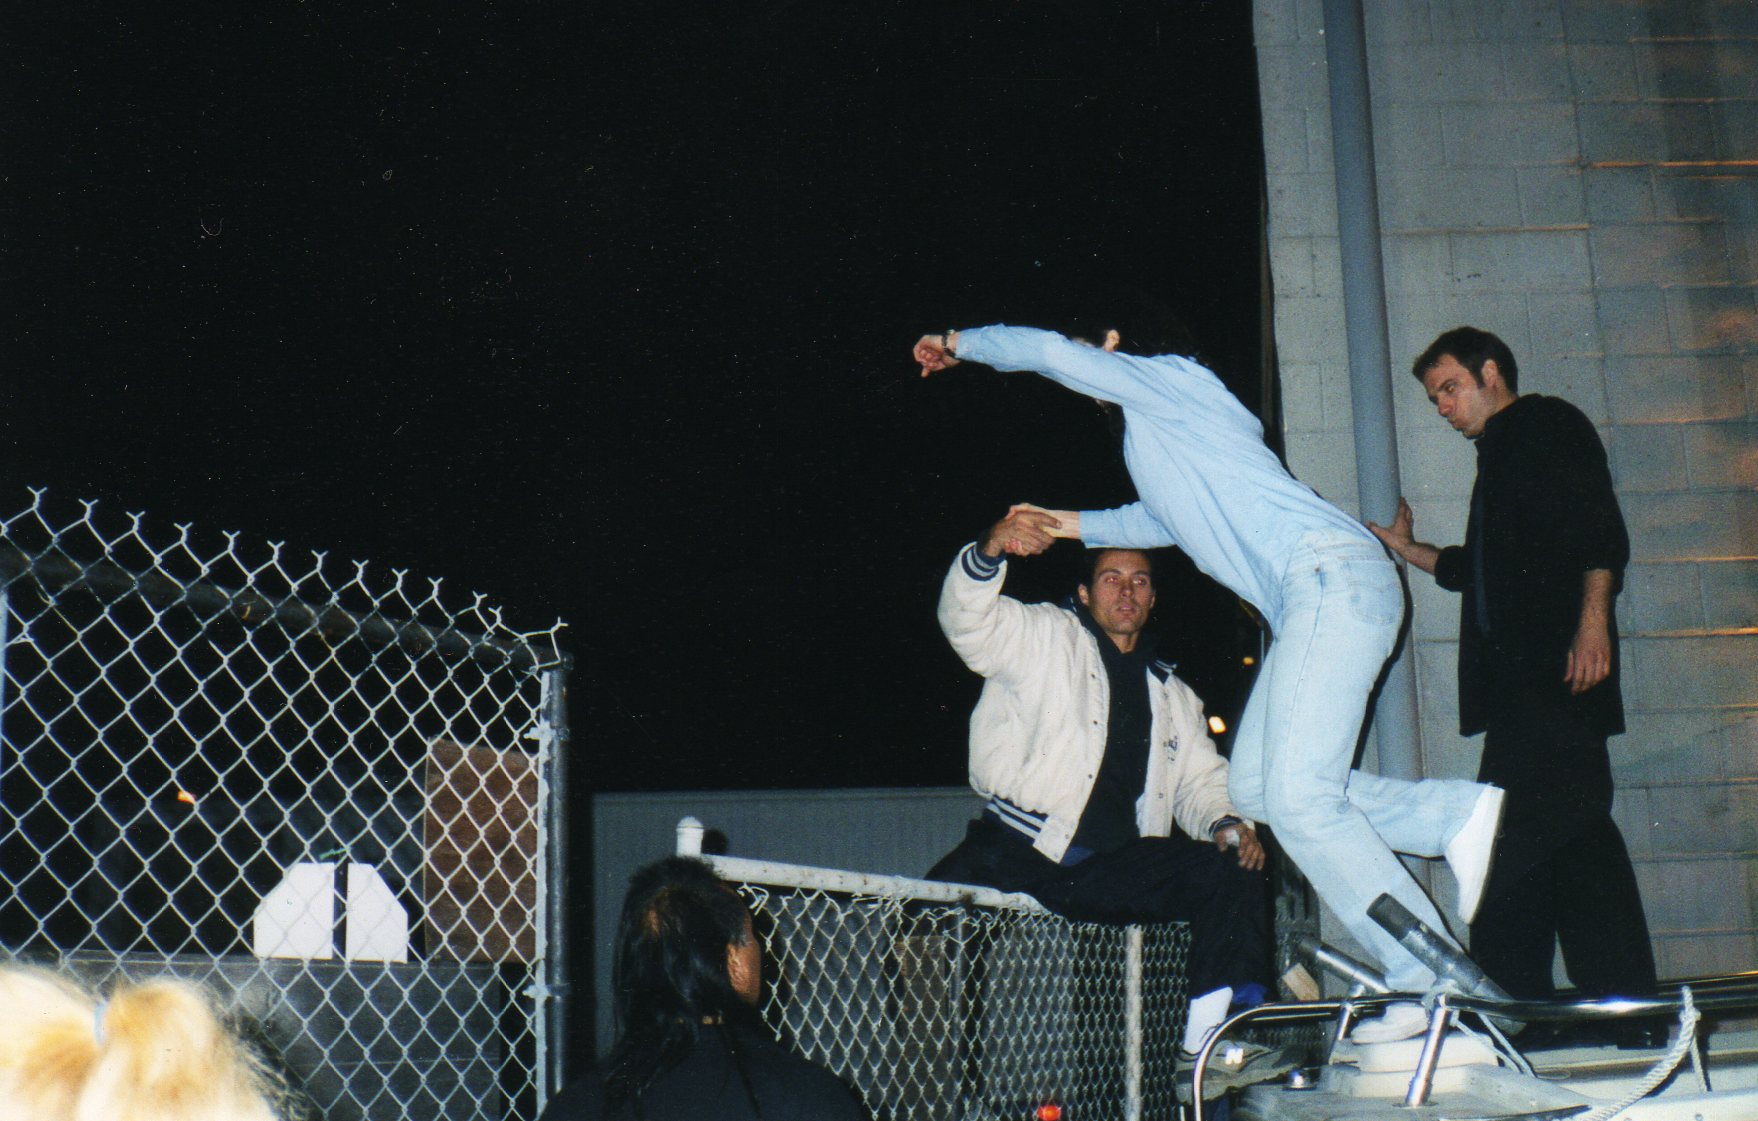 Rehearsing a stunt on the set of 